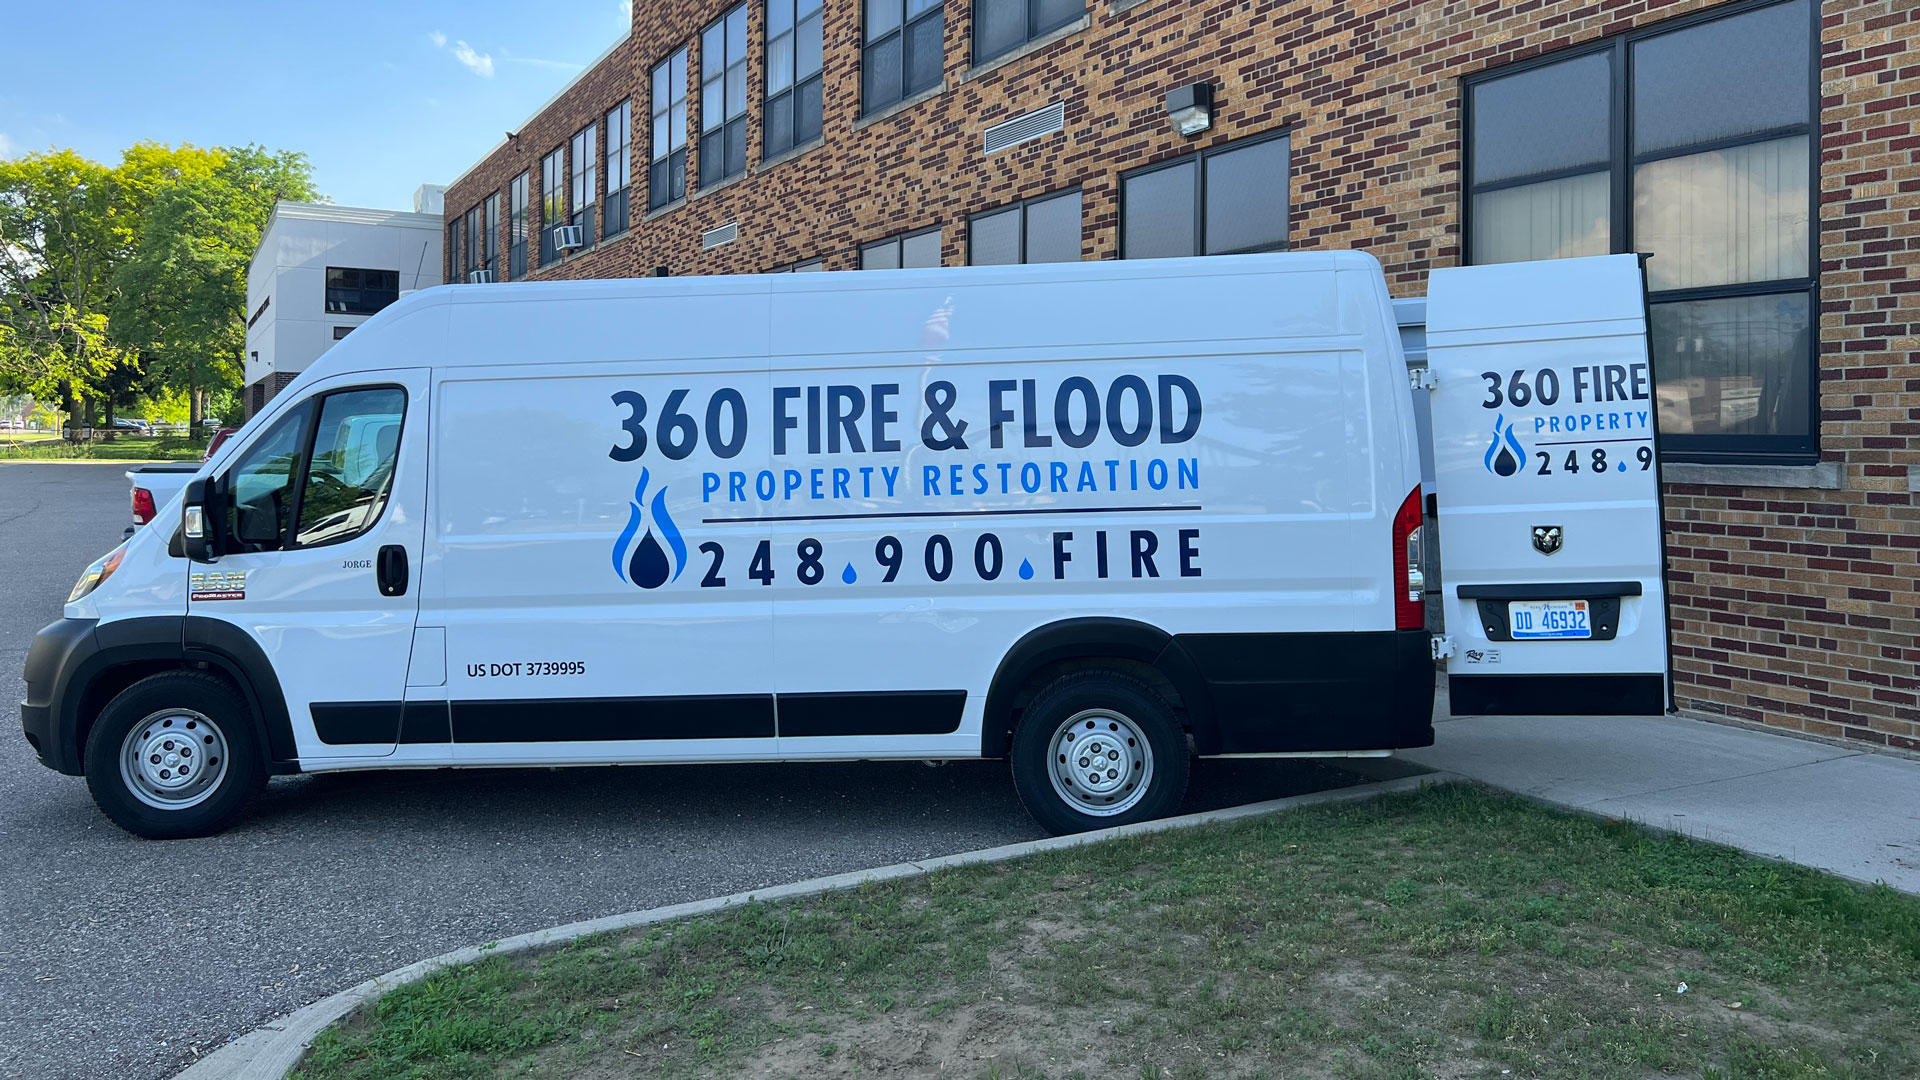 360 Fire & Flood truck parked in front of job site